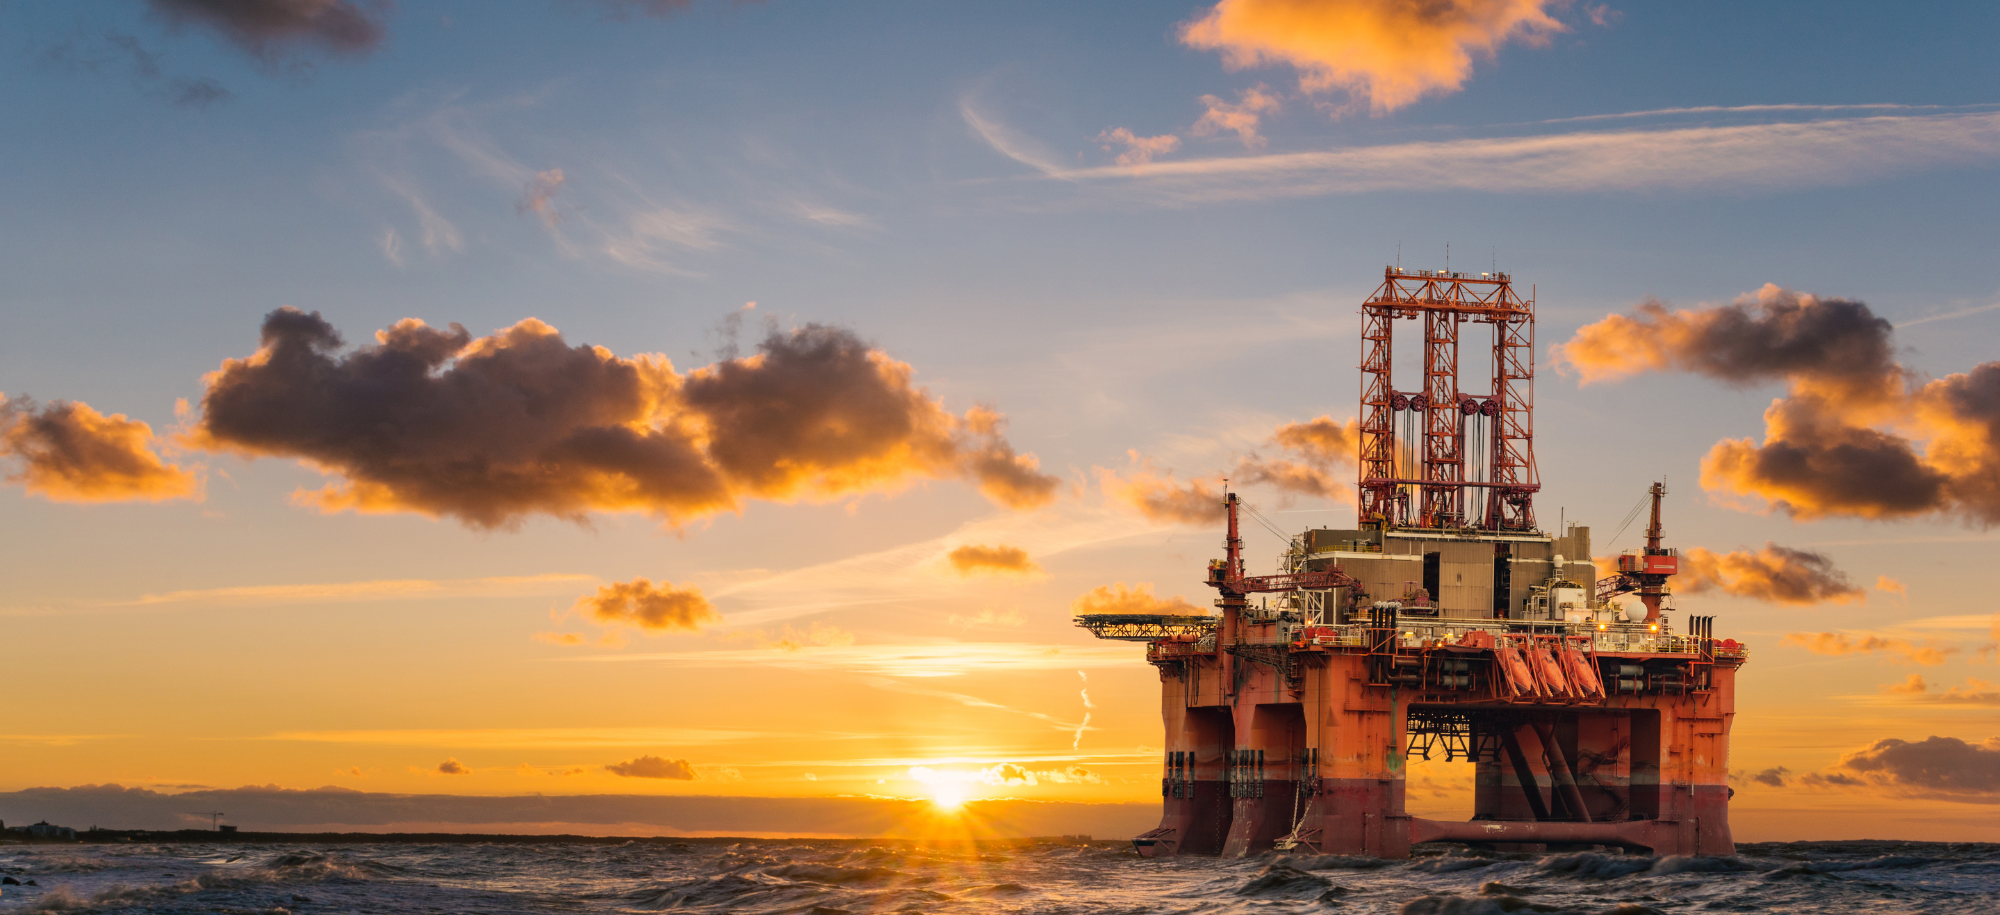 An image of an oil rig to be used on a news post.